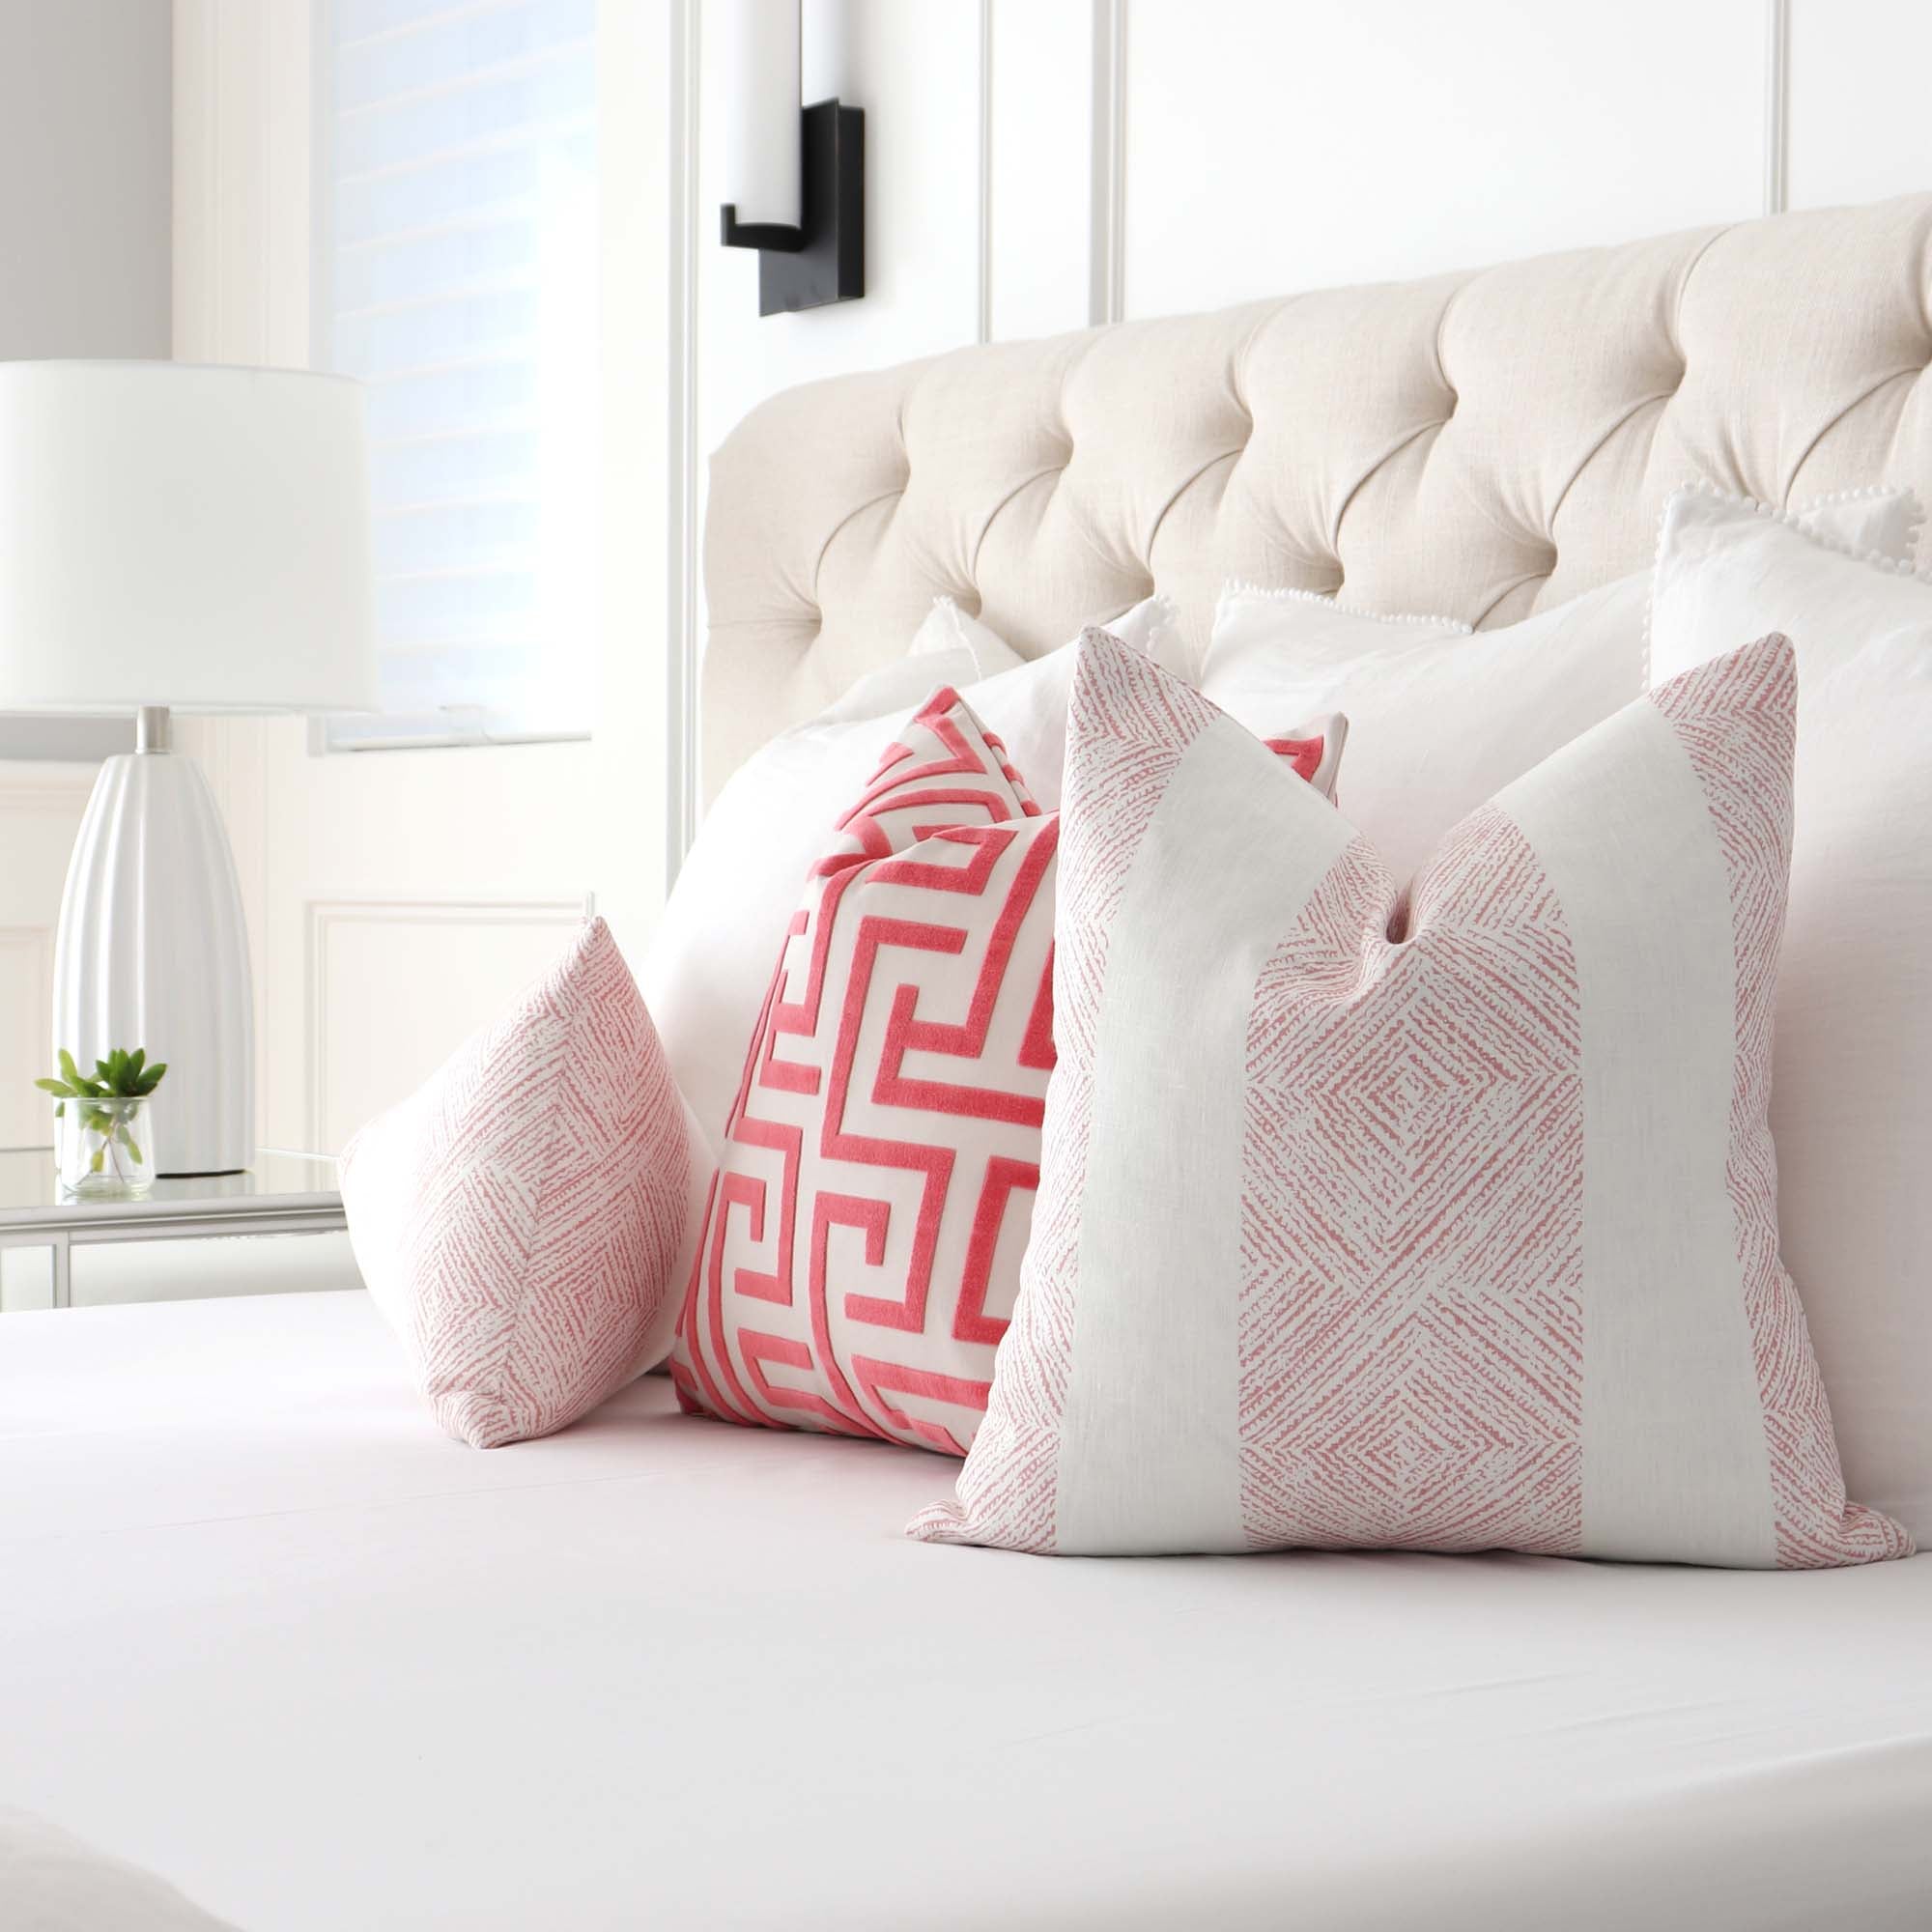 Thibaut Clipperton Stripe Blush Pink Designer Luxury Throw Pillow Cover in Bedroom with Ming Trail Cut Velvet Throw Pillow